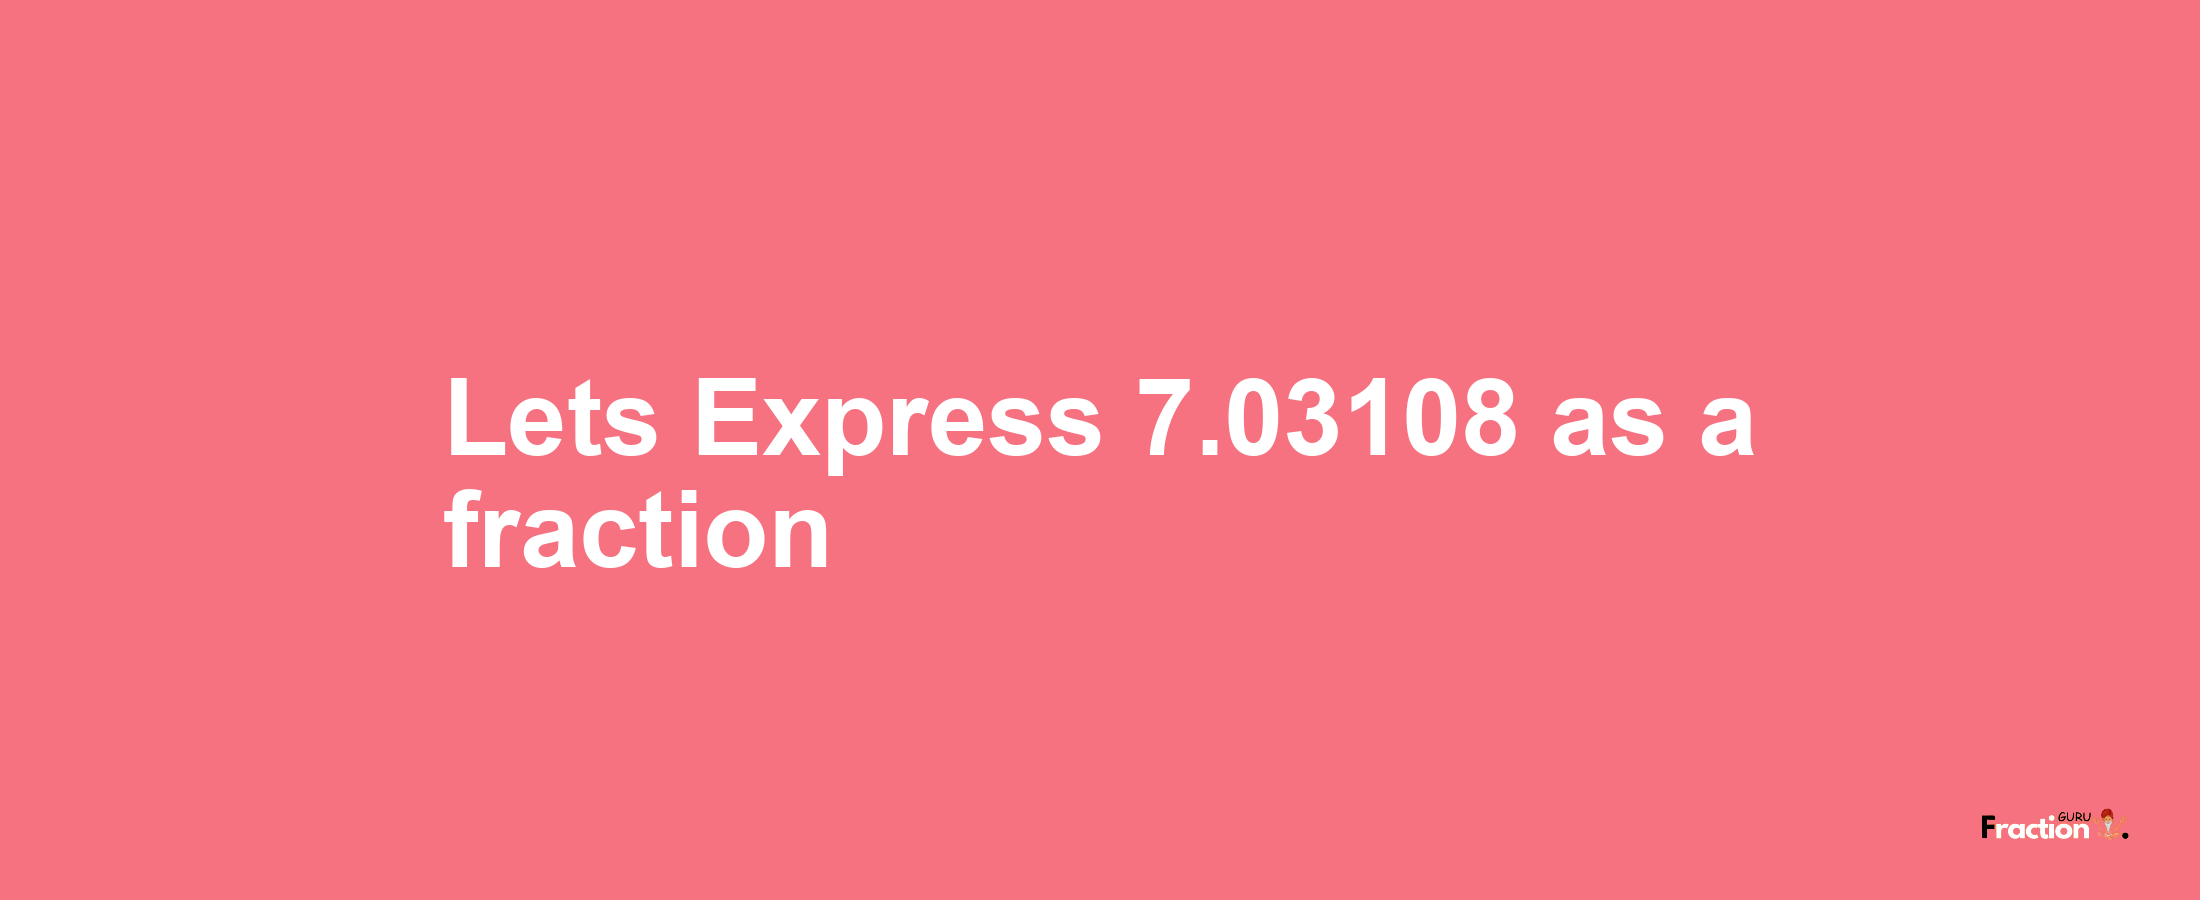 Lets Express 7.03108 as afraction